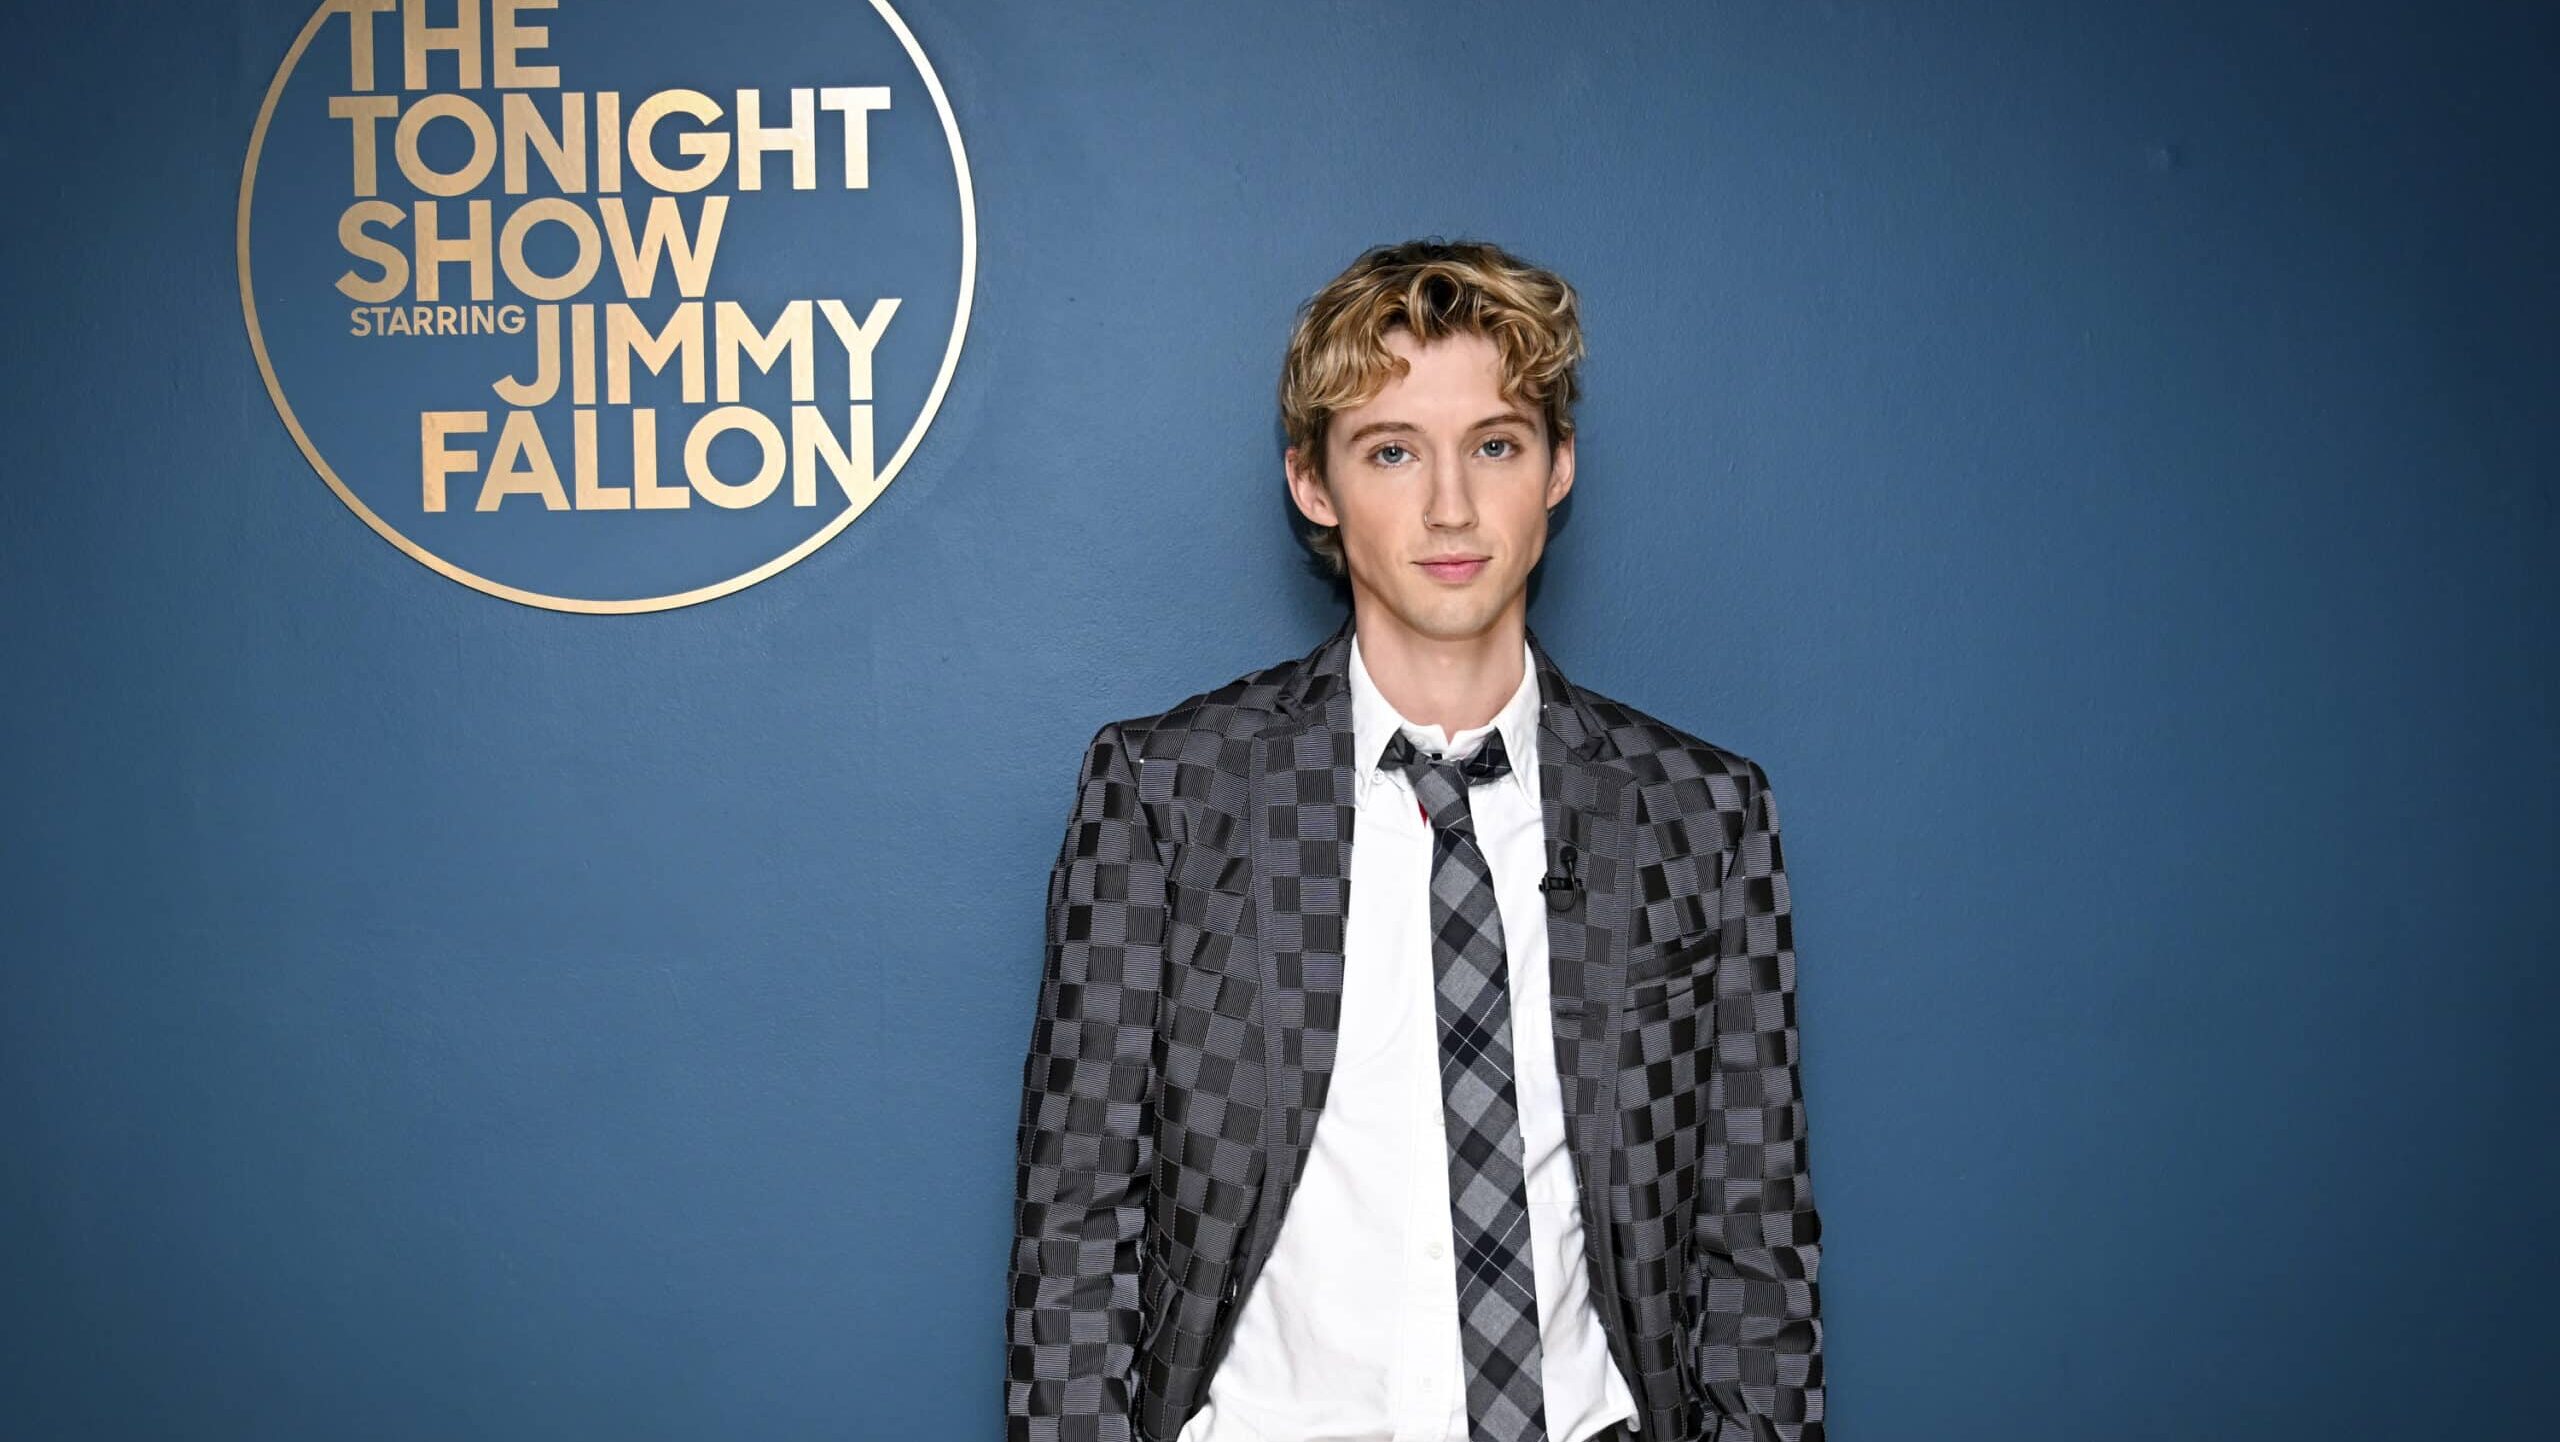 THE TONIGHT SHOW STARRING JIMMY FALLON -- Episode 1850 -- Pictured: Singer & actor Troye Sivan poses backstage on Tuesday, October 10, 2023 --